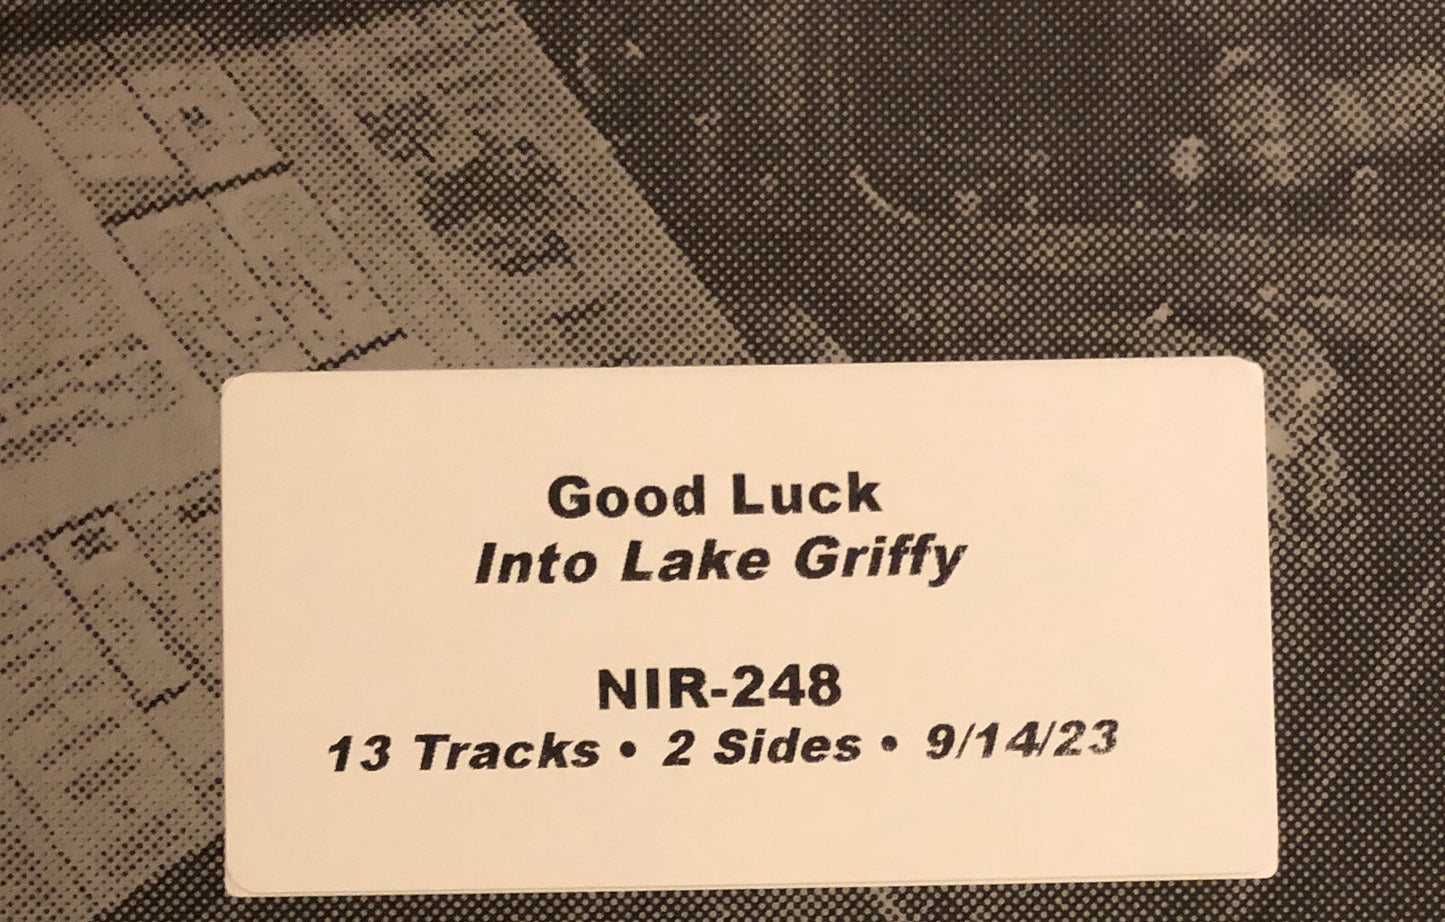 GOOD LUCK "Into Lake Griffy" TEST PRESSING